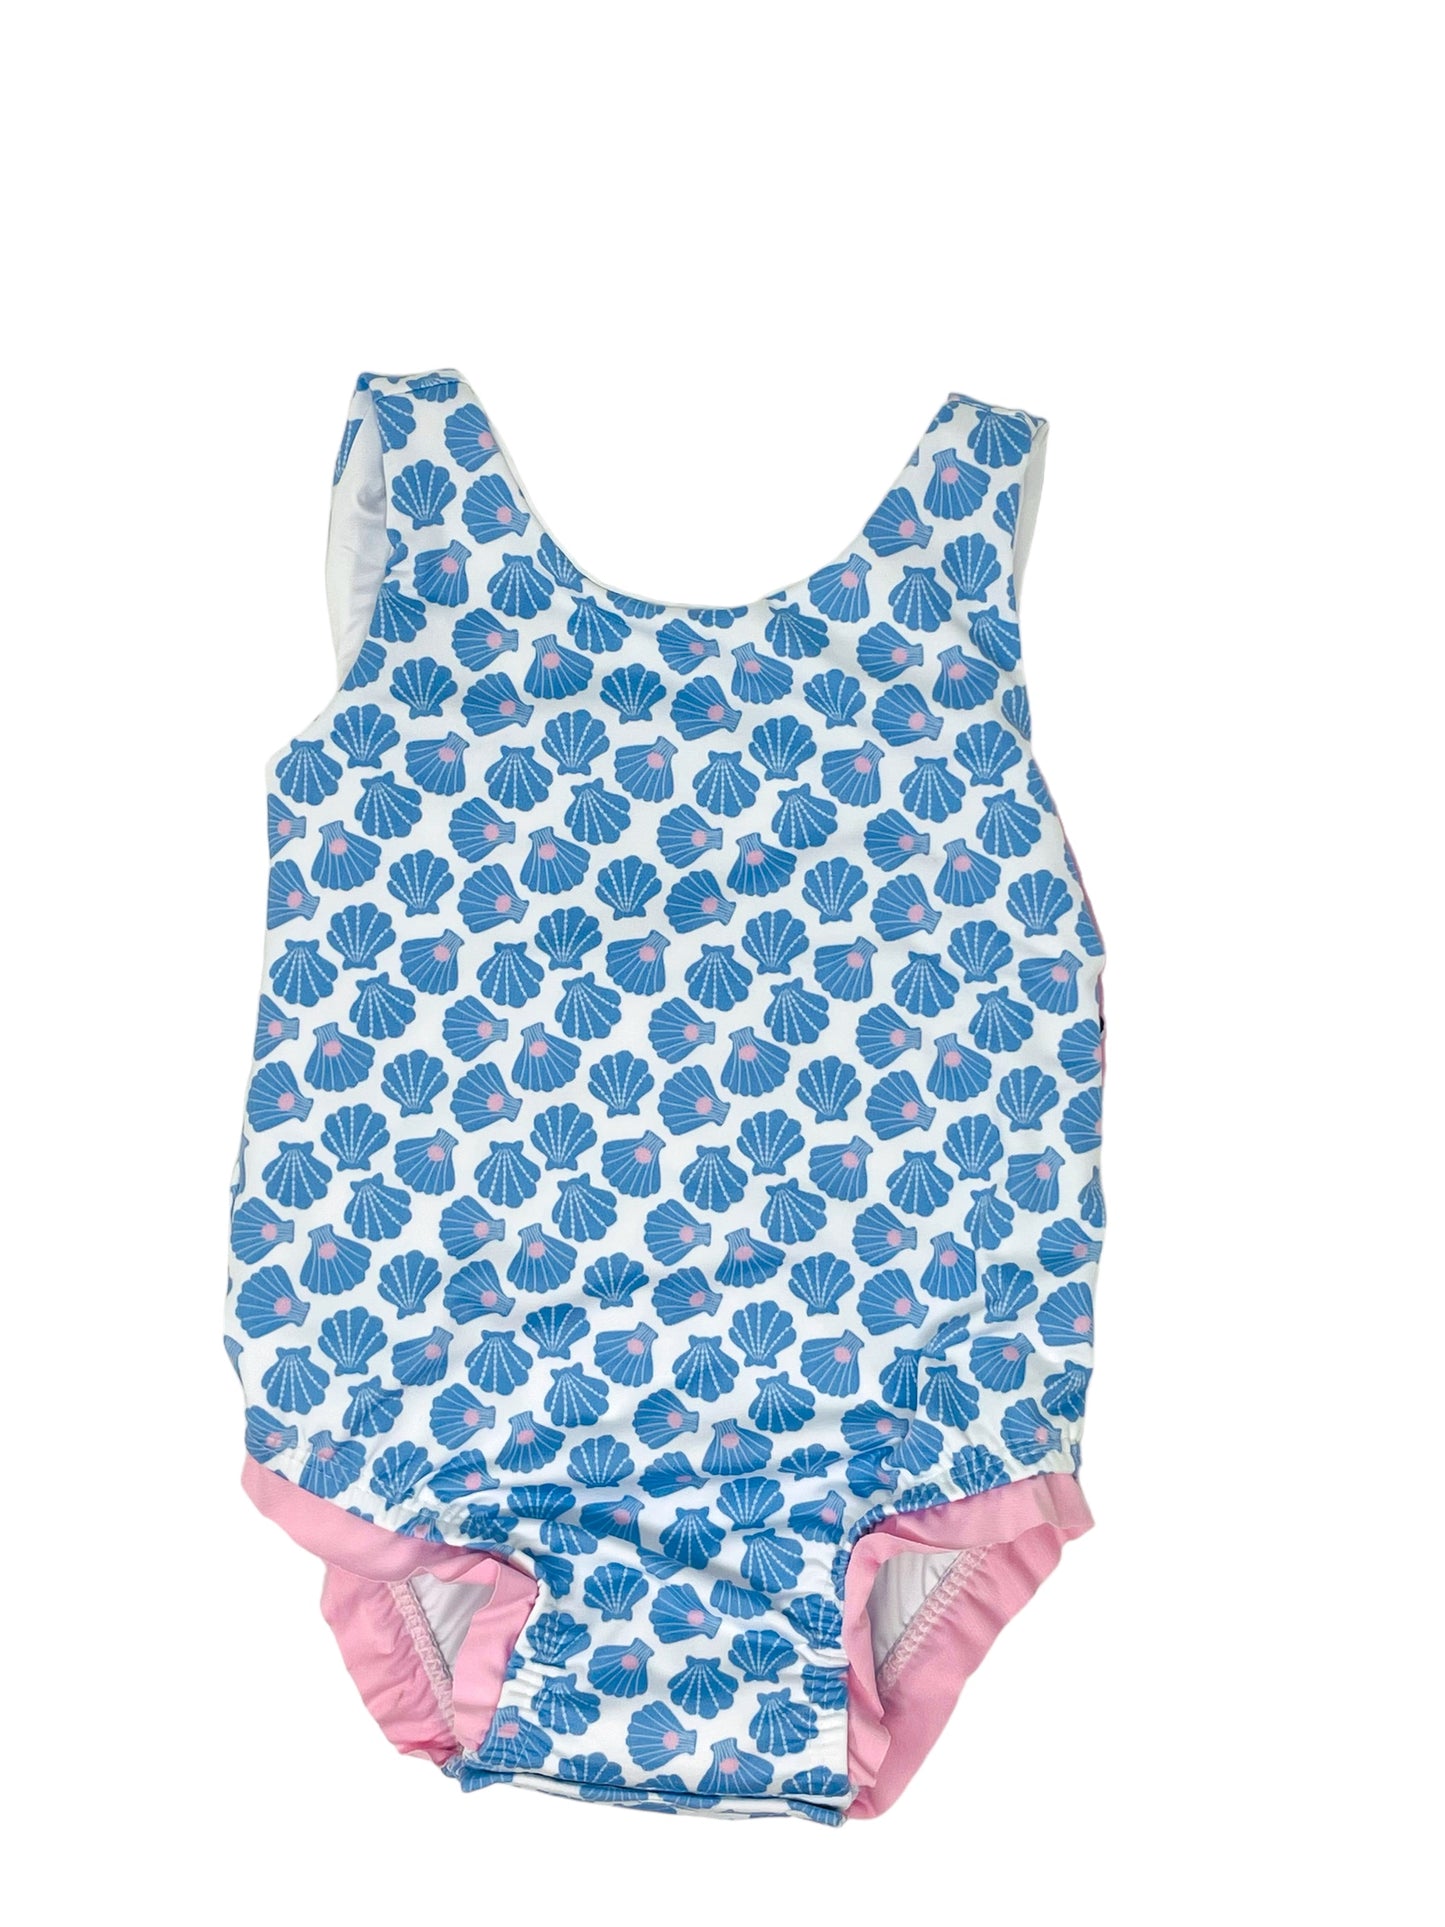 Sea Shells with Pink Bow Bathing Suit